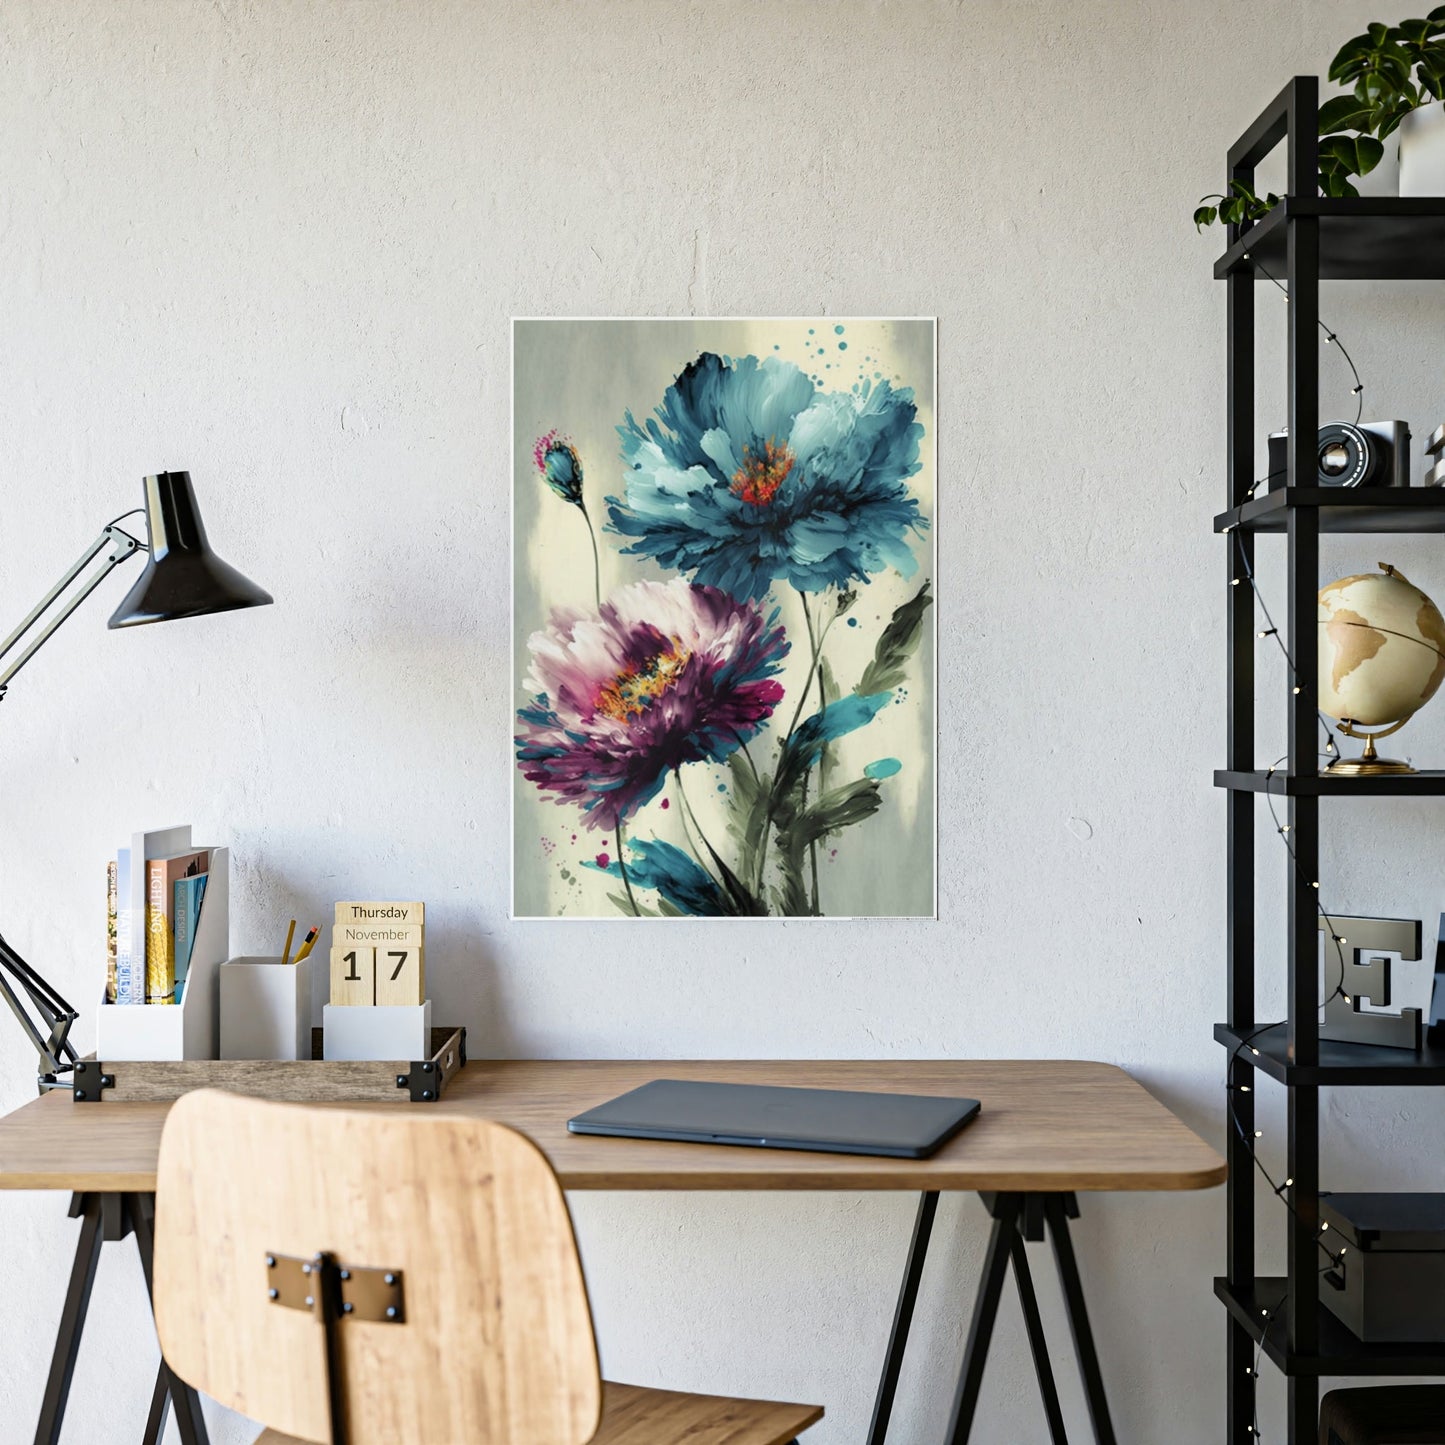 Framed Canvas & Poster Print of Abstract Bouquets: A Symphony of Colors